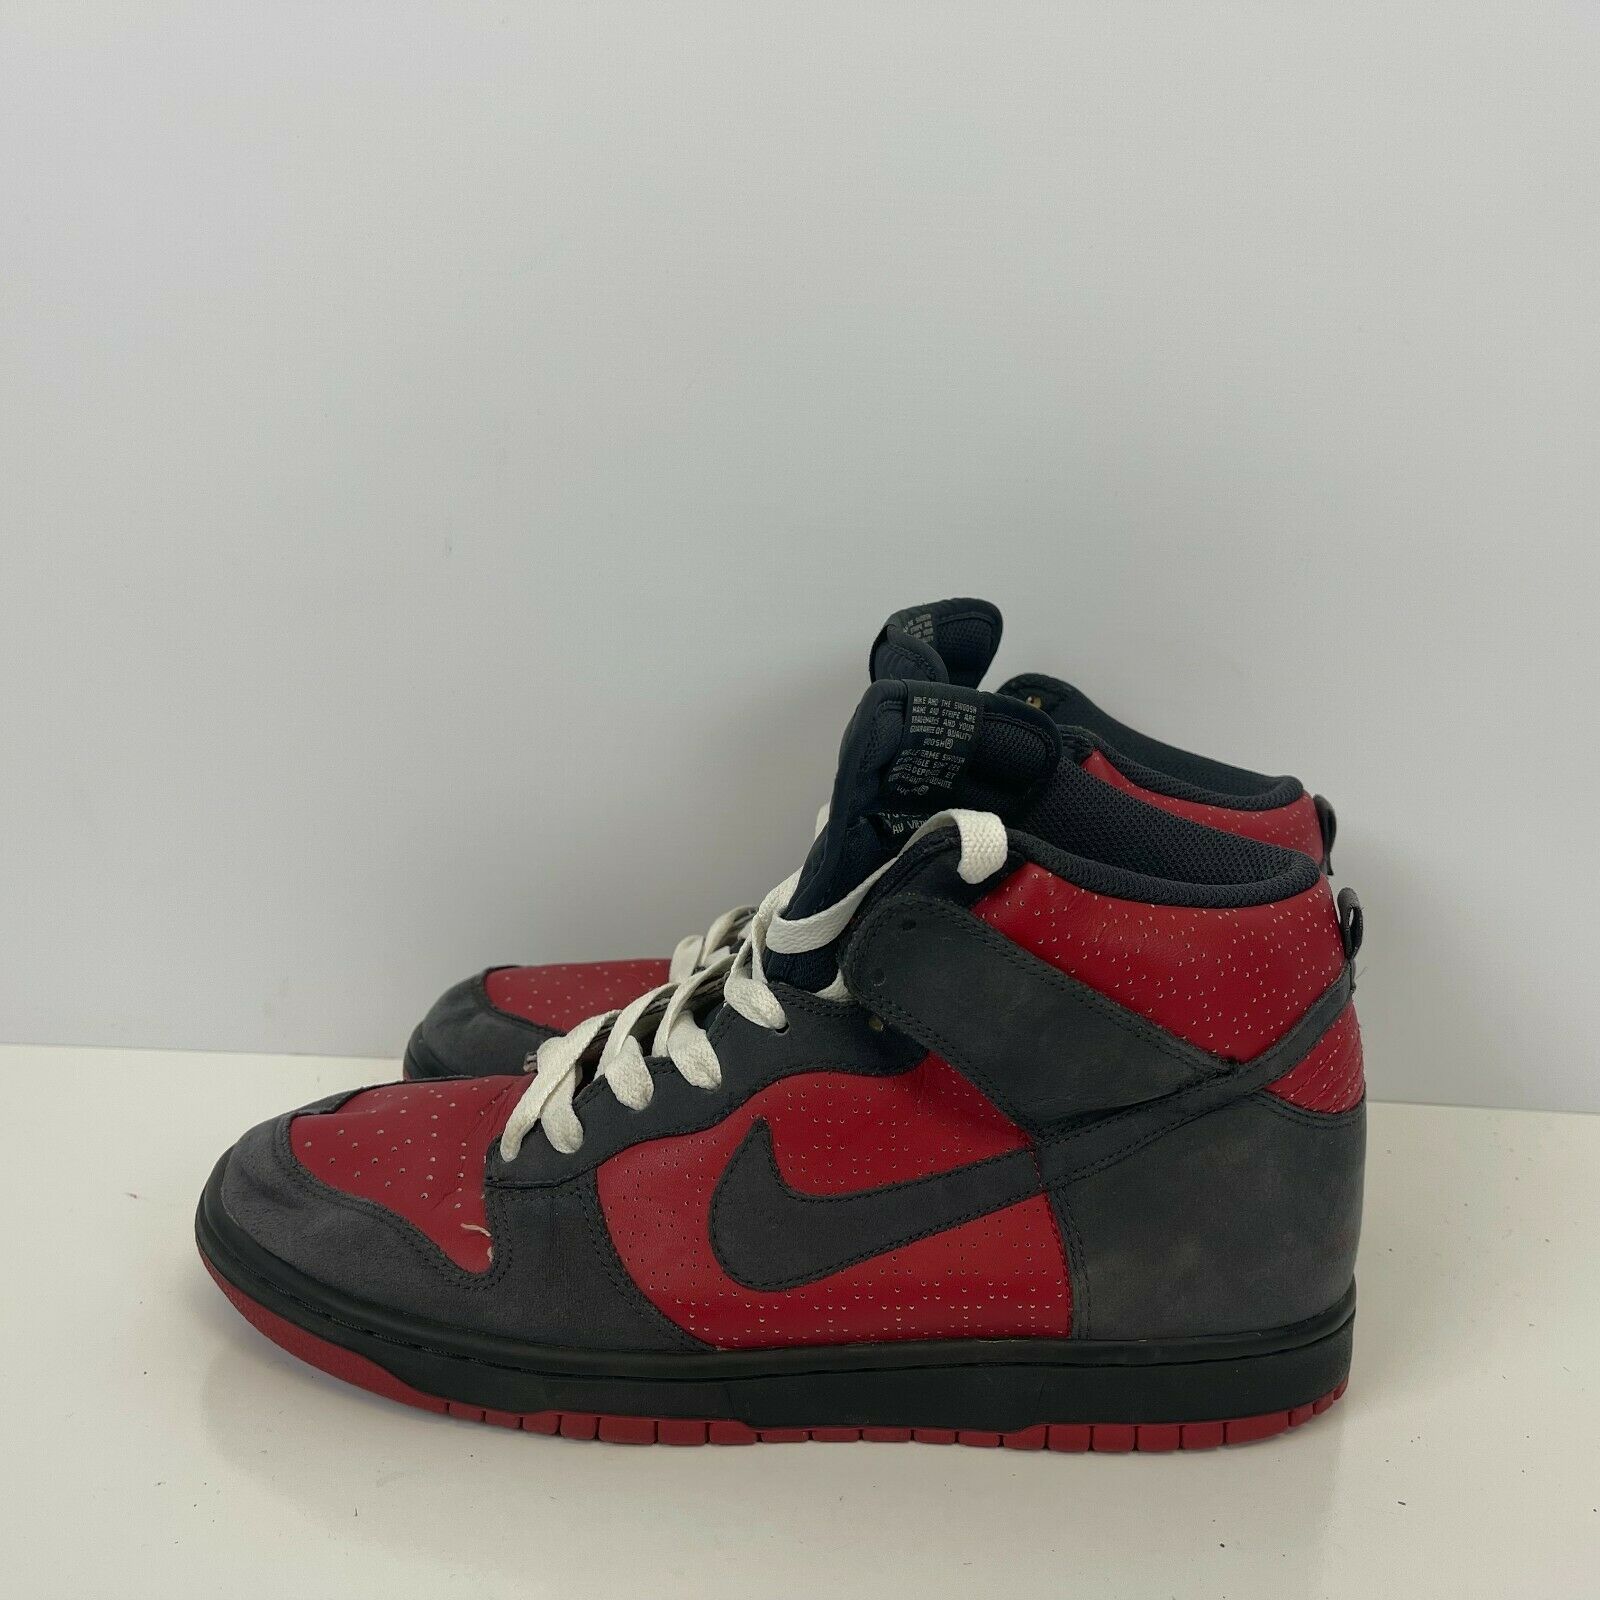 Nike Dunk High Shoes Ultraman Red Anthracite Grey 2009 Release Mens Size 10